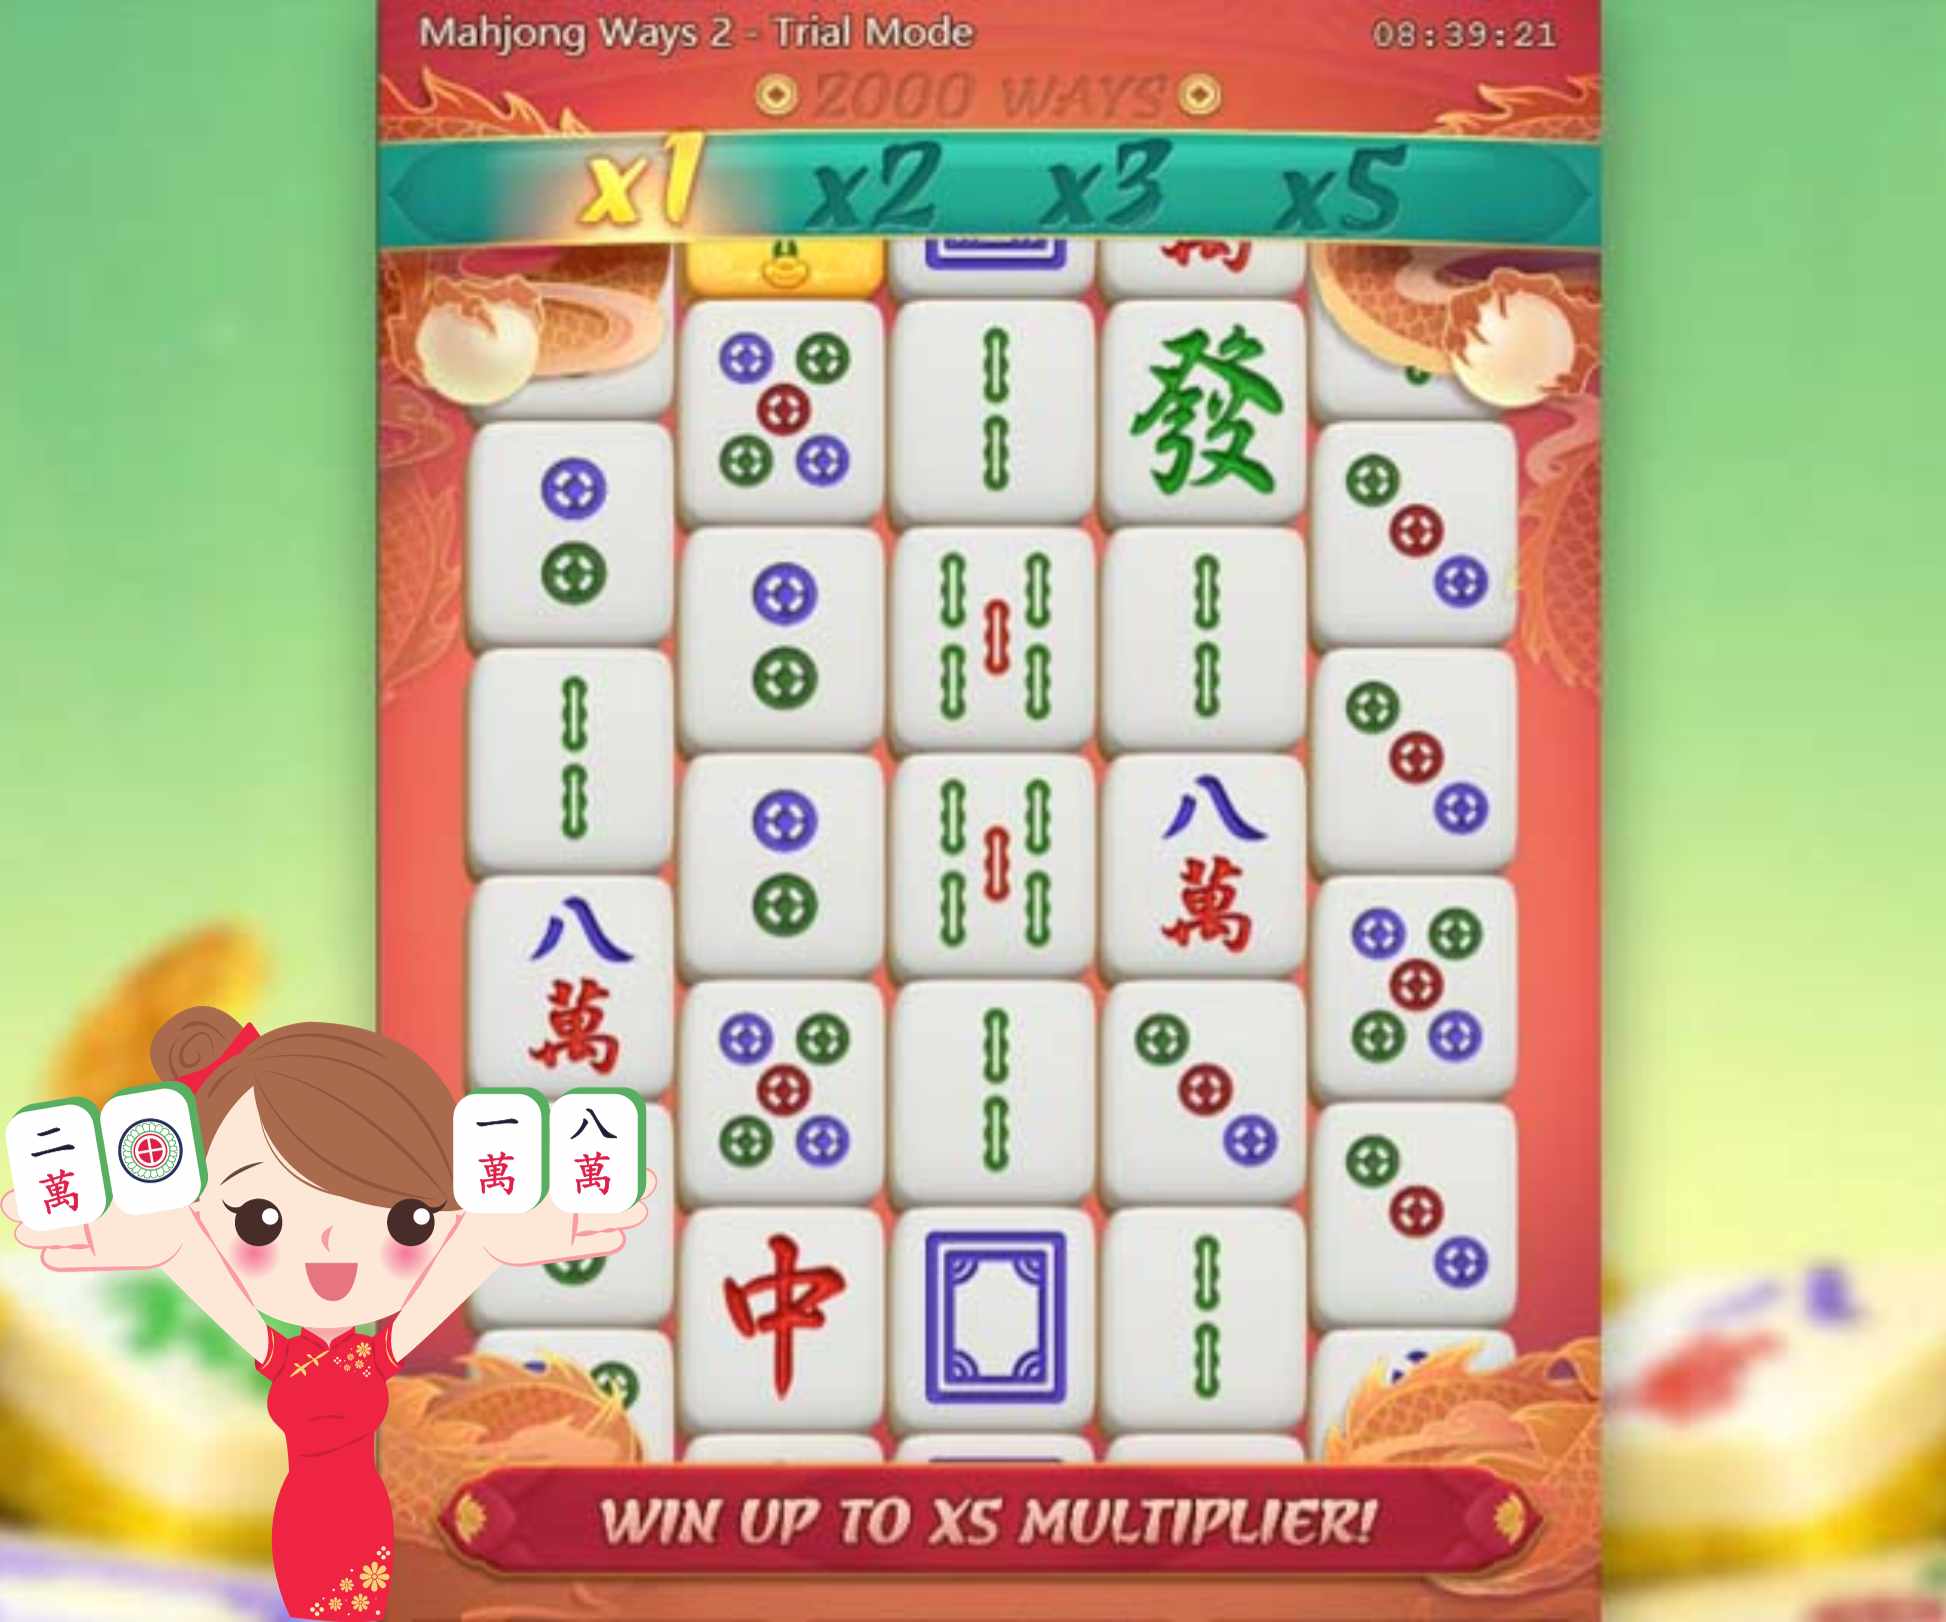 The level of Mahjong Ways 2 fans is skyrocketing